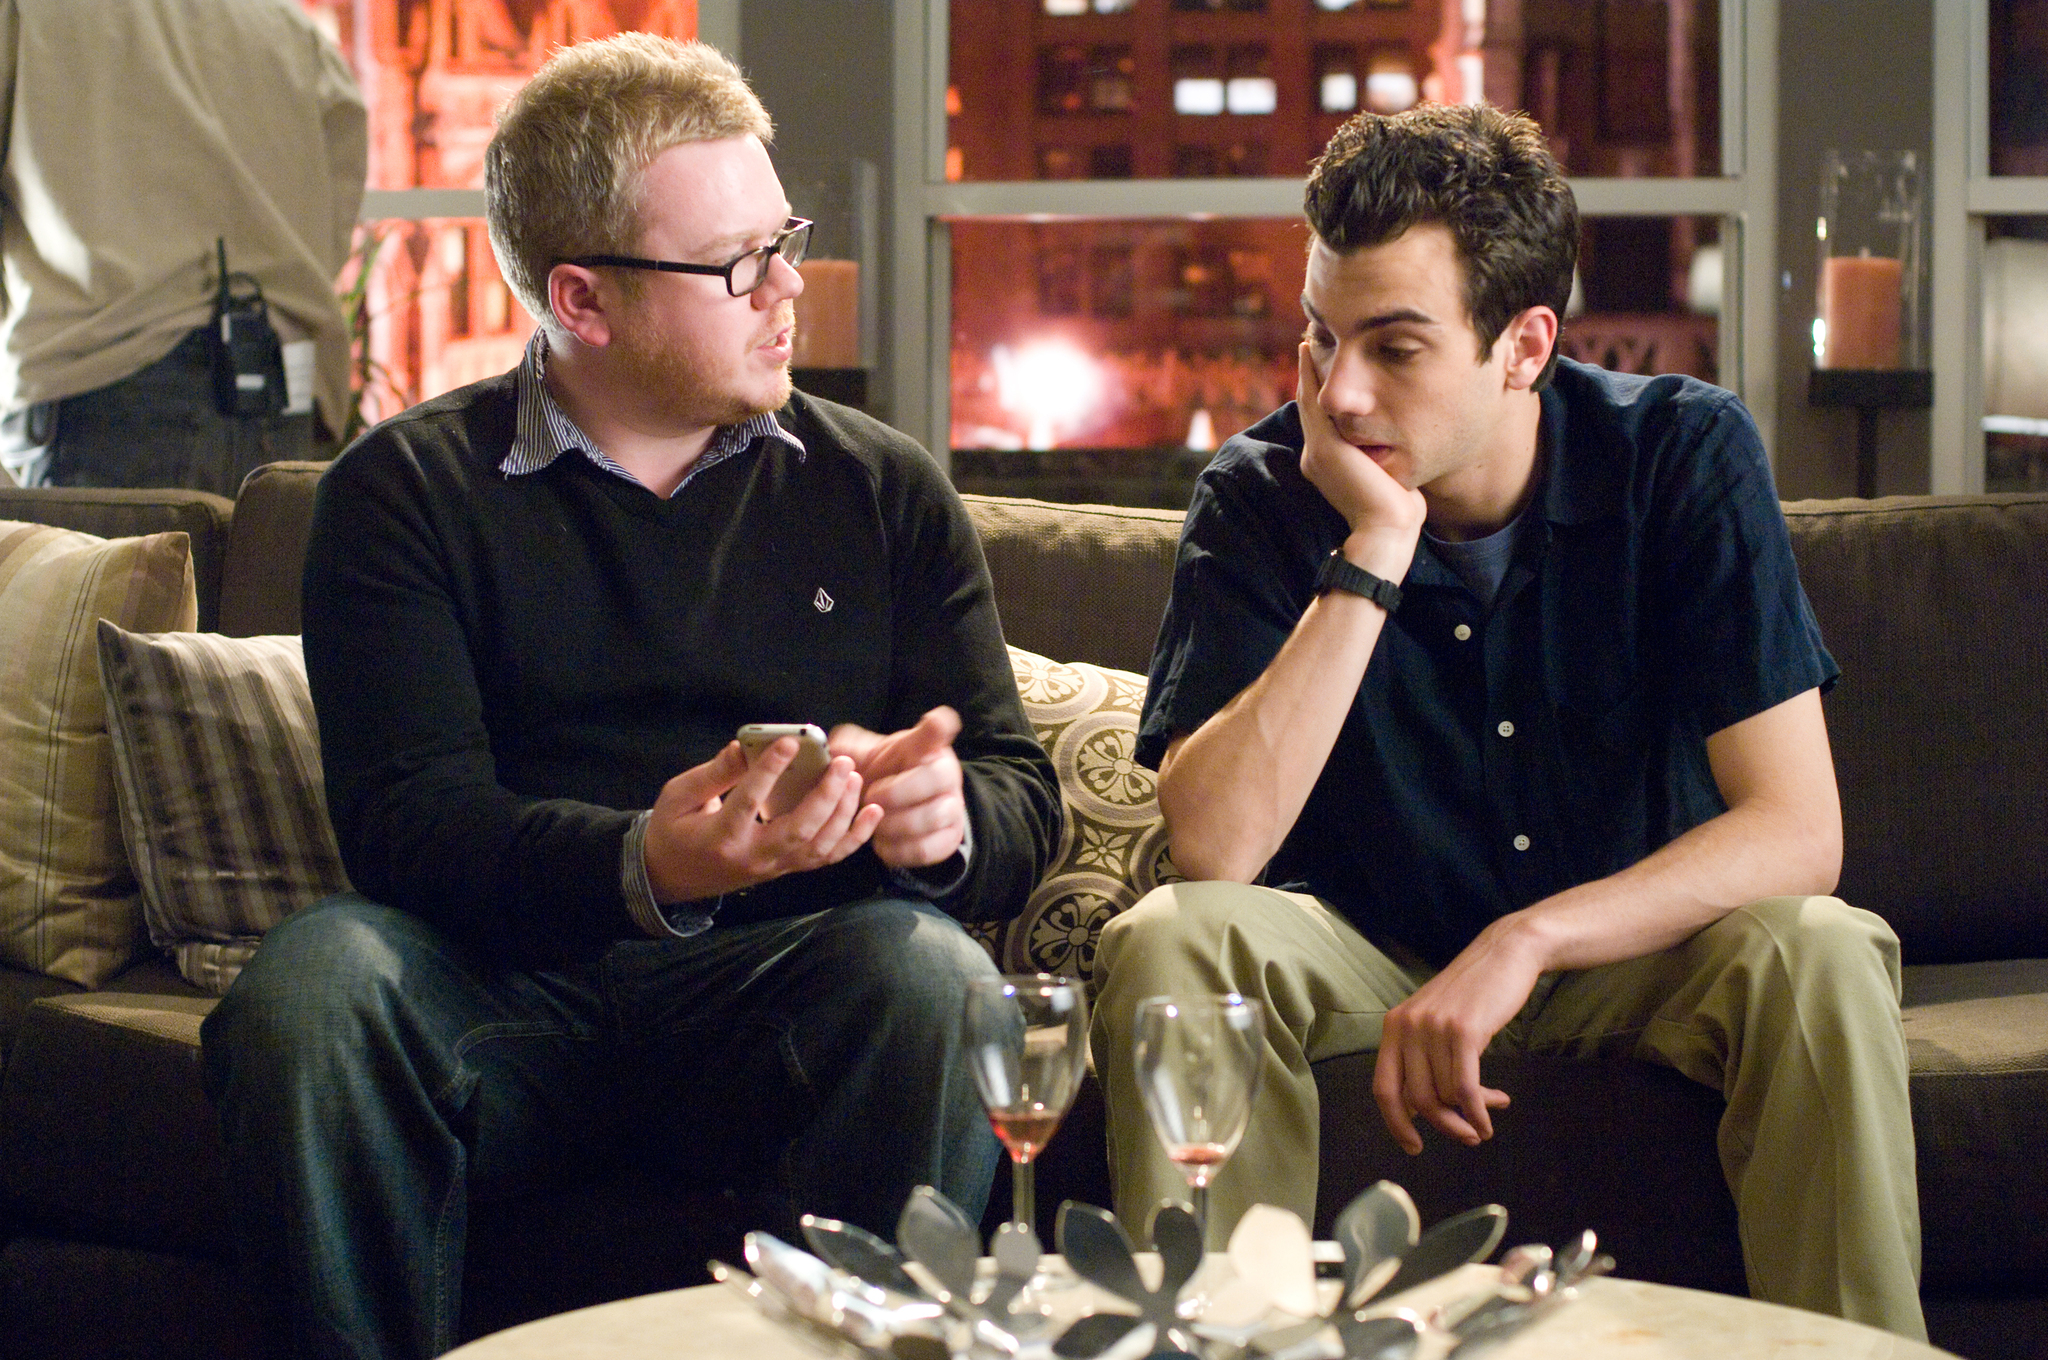 Still of Jay Baruchel and Jim Field Smith in She's Out of My League (2010)